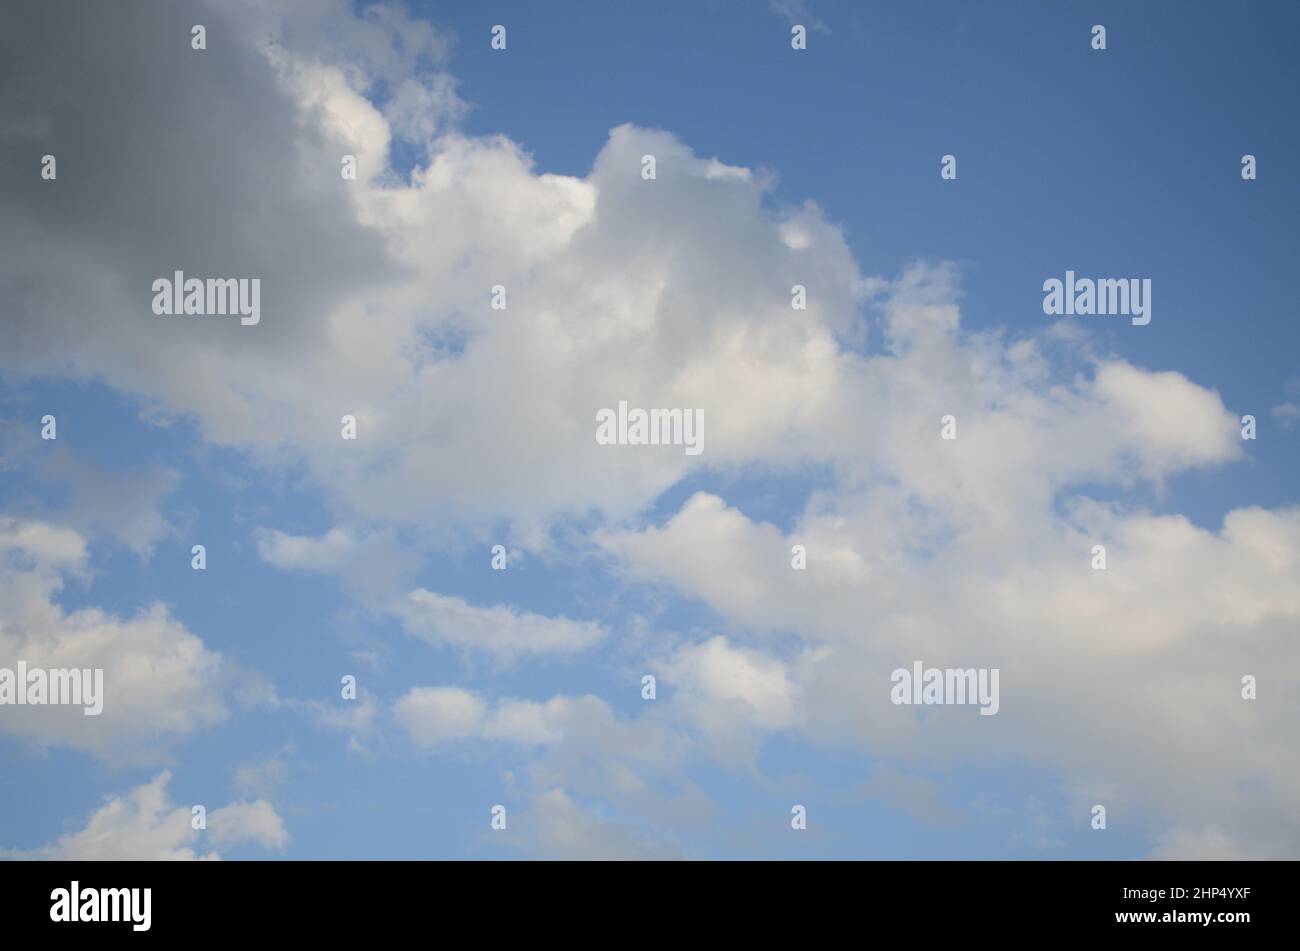 Milky white clouds Stock Photo